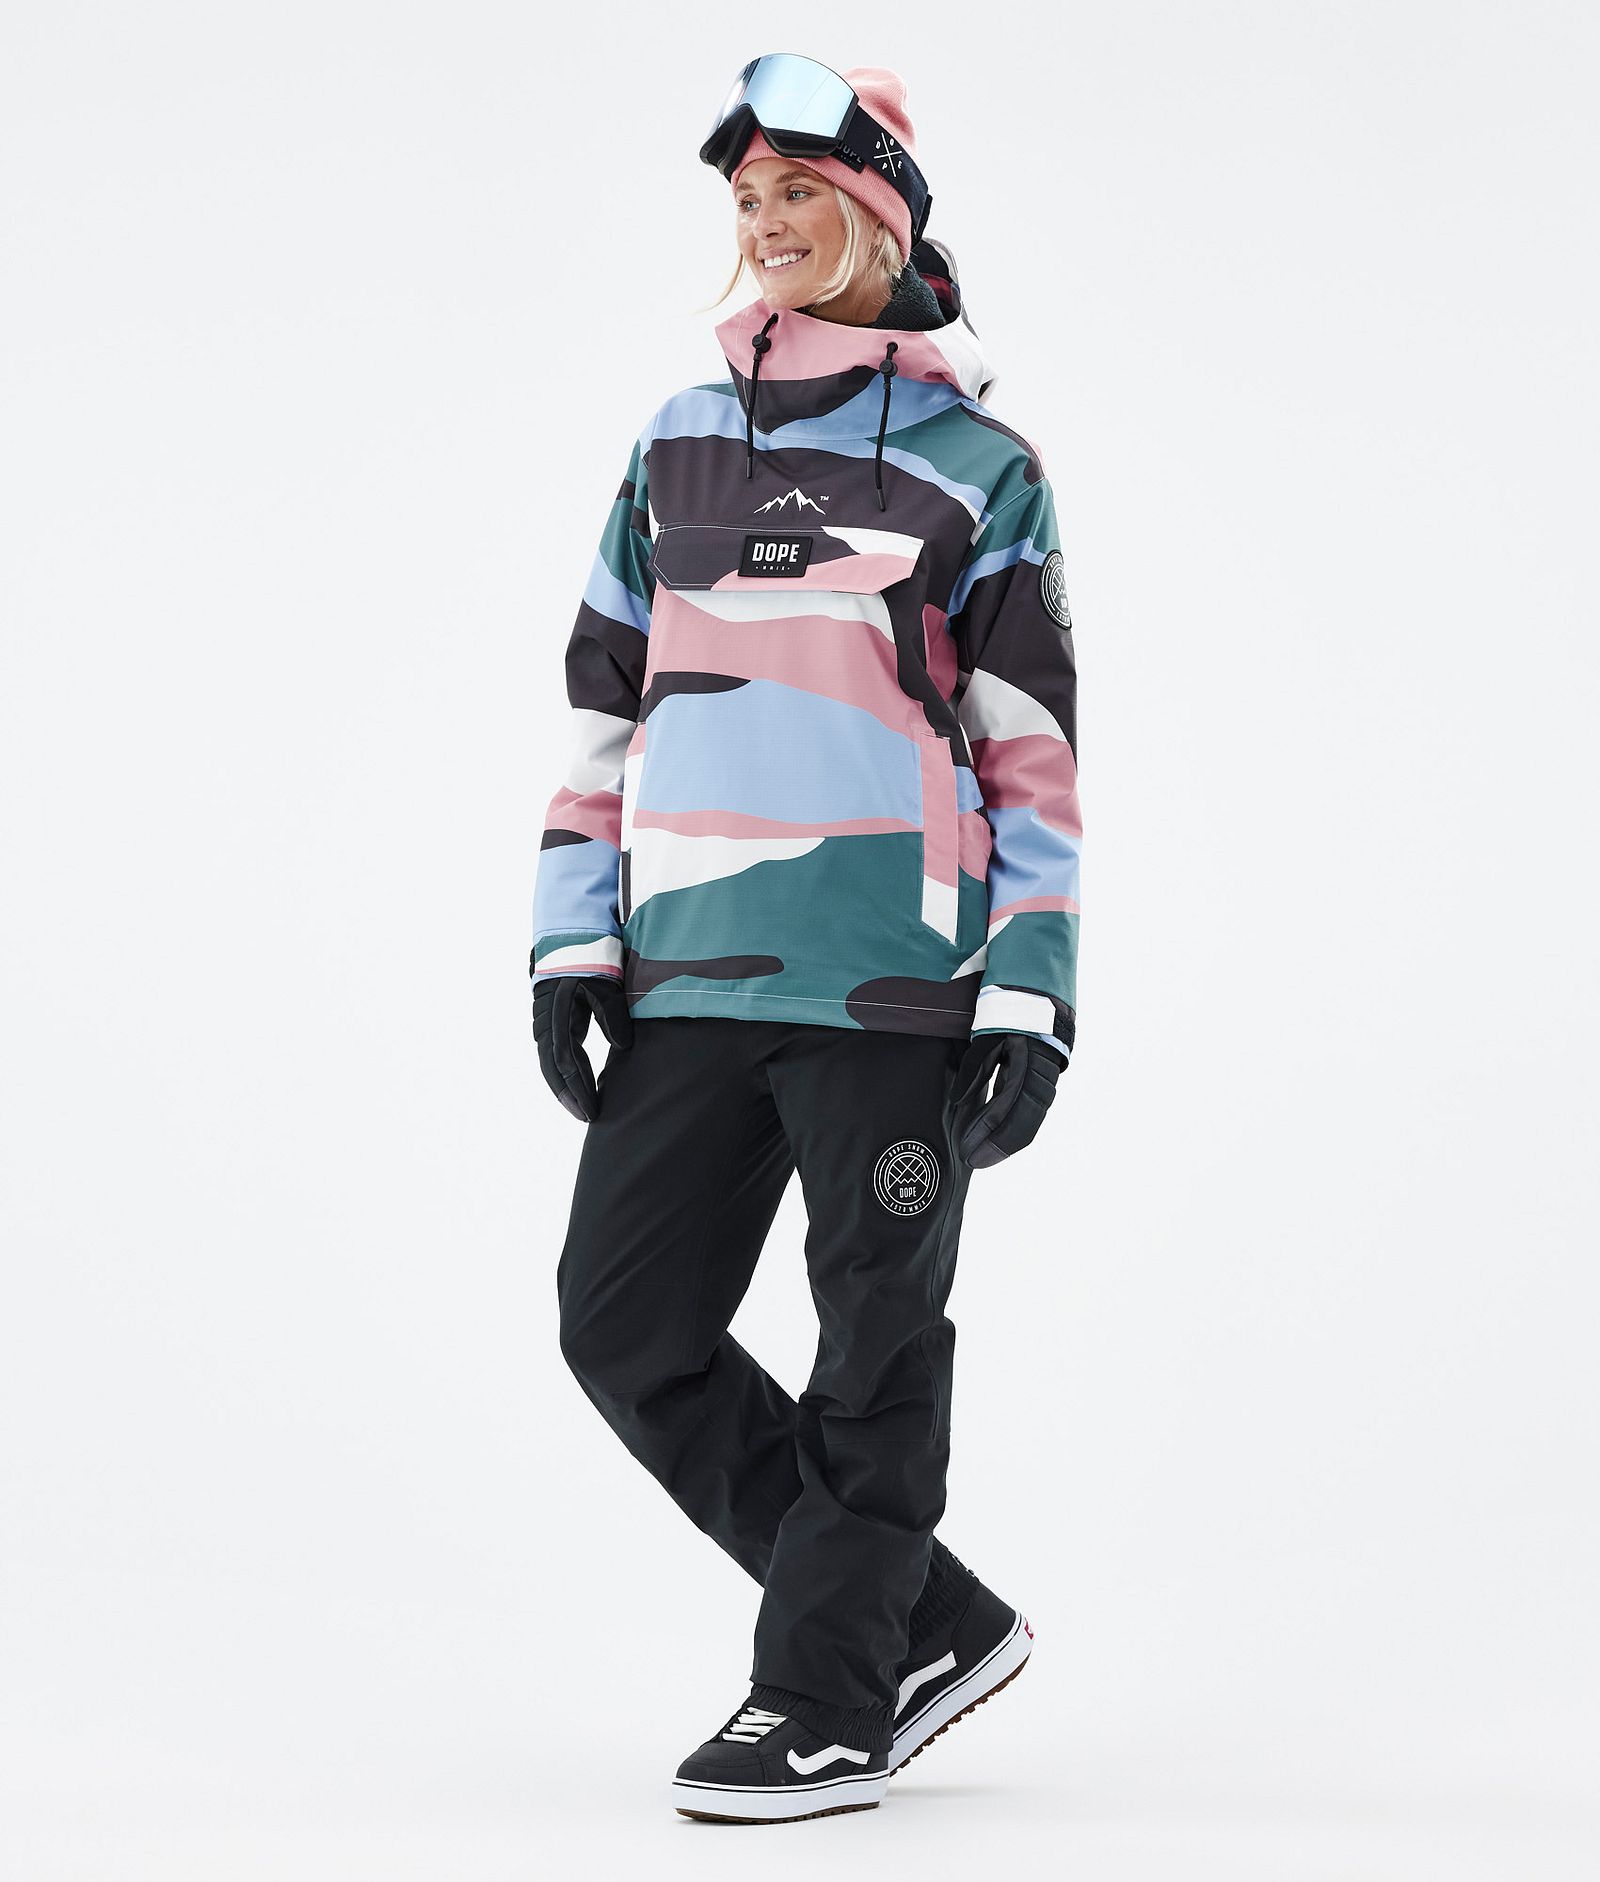 Dope Blizzard W 2022 Giacca Snowboard Donna Shards Light Blue Muted Pink Renewed, Immagine 3 di 9